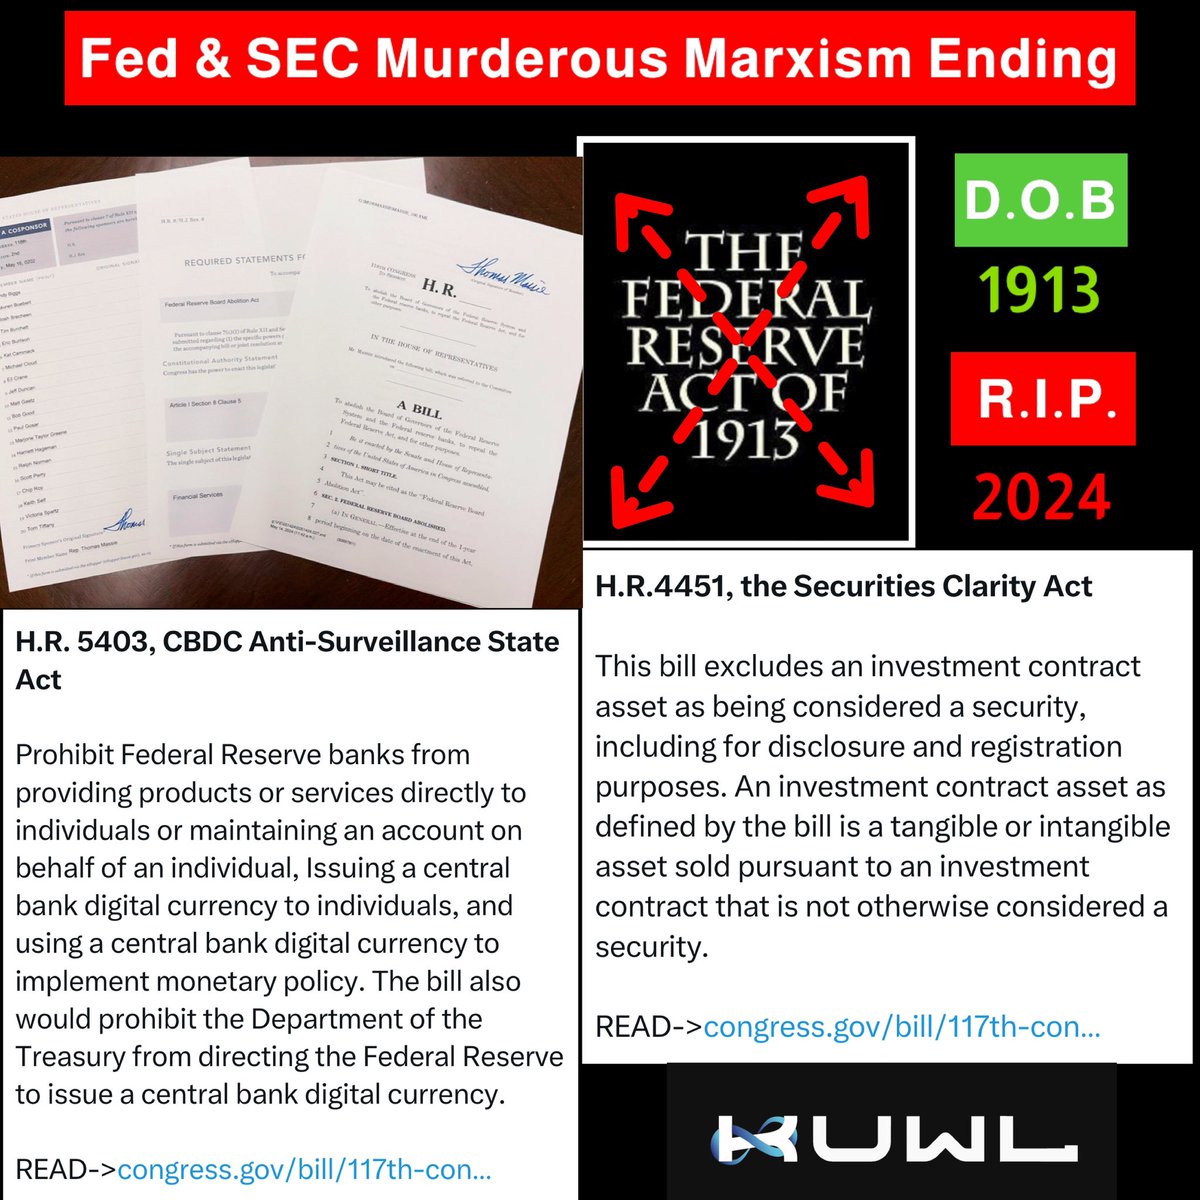 Between the lines, behind the curtains, in plain sight, within active Executive Orders and under the Highest Lawful Authority in America - the Uniform Code of Military Justice (#UCMJ)- the @federalreserve and it’s godless offspring, the @SECGov, have been ordered eliminated and